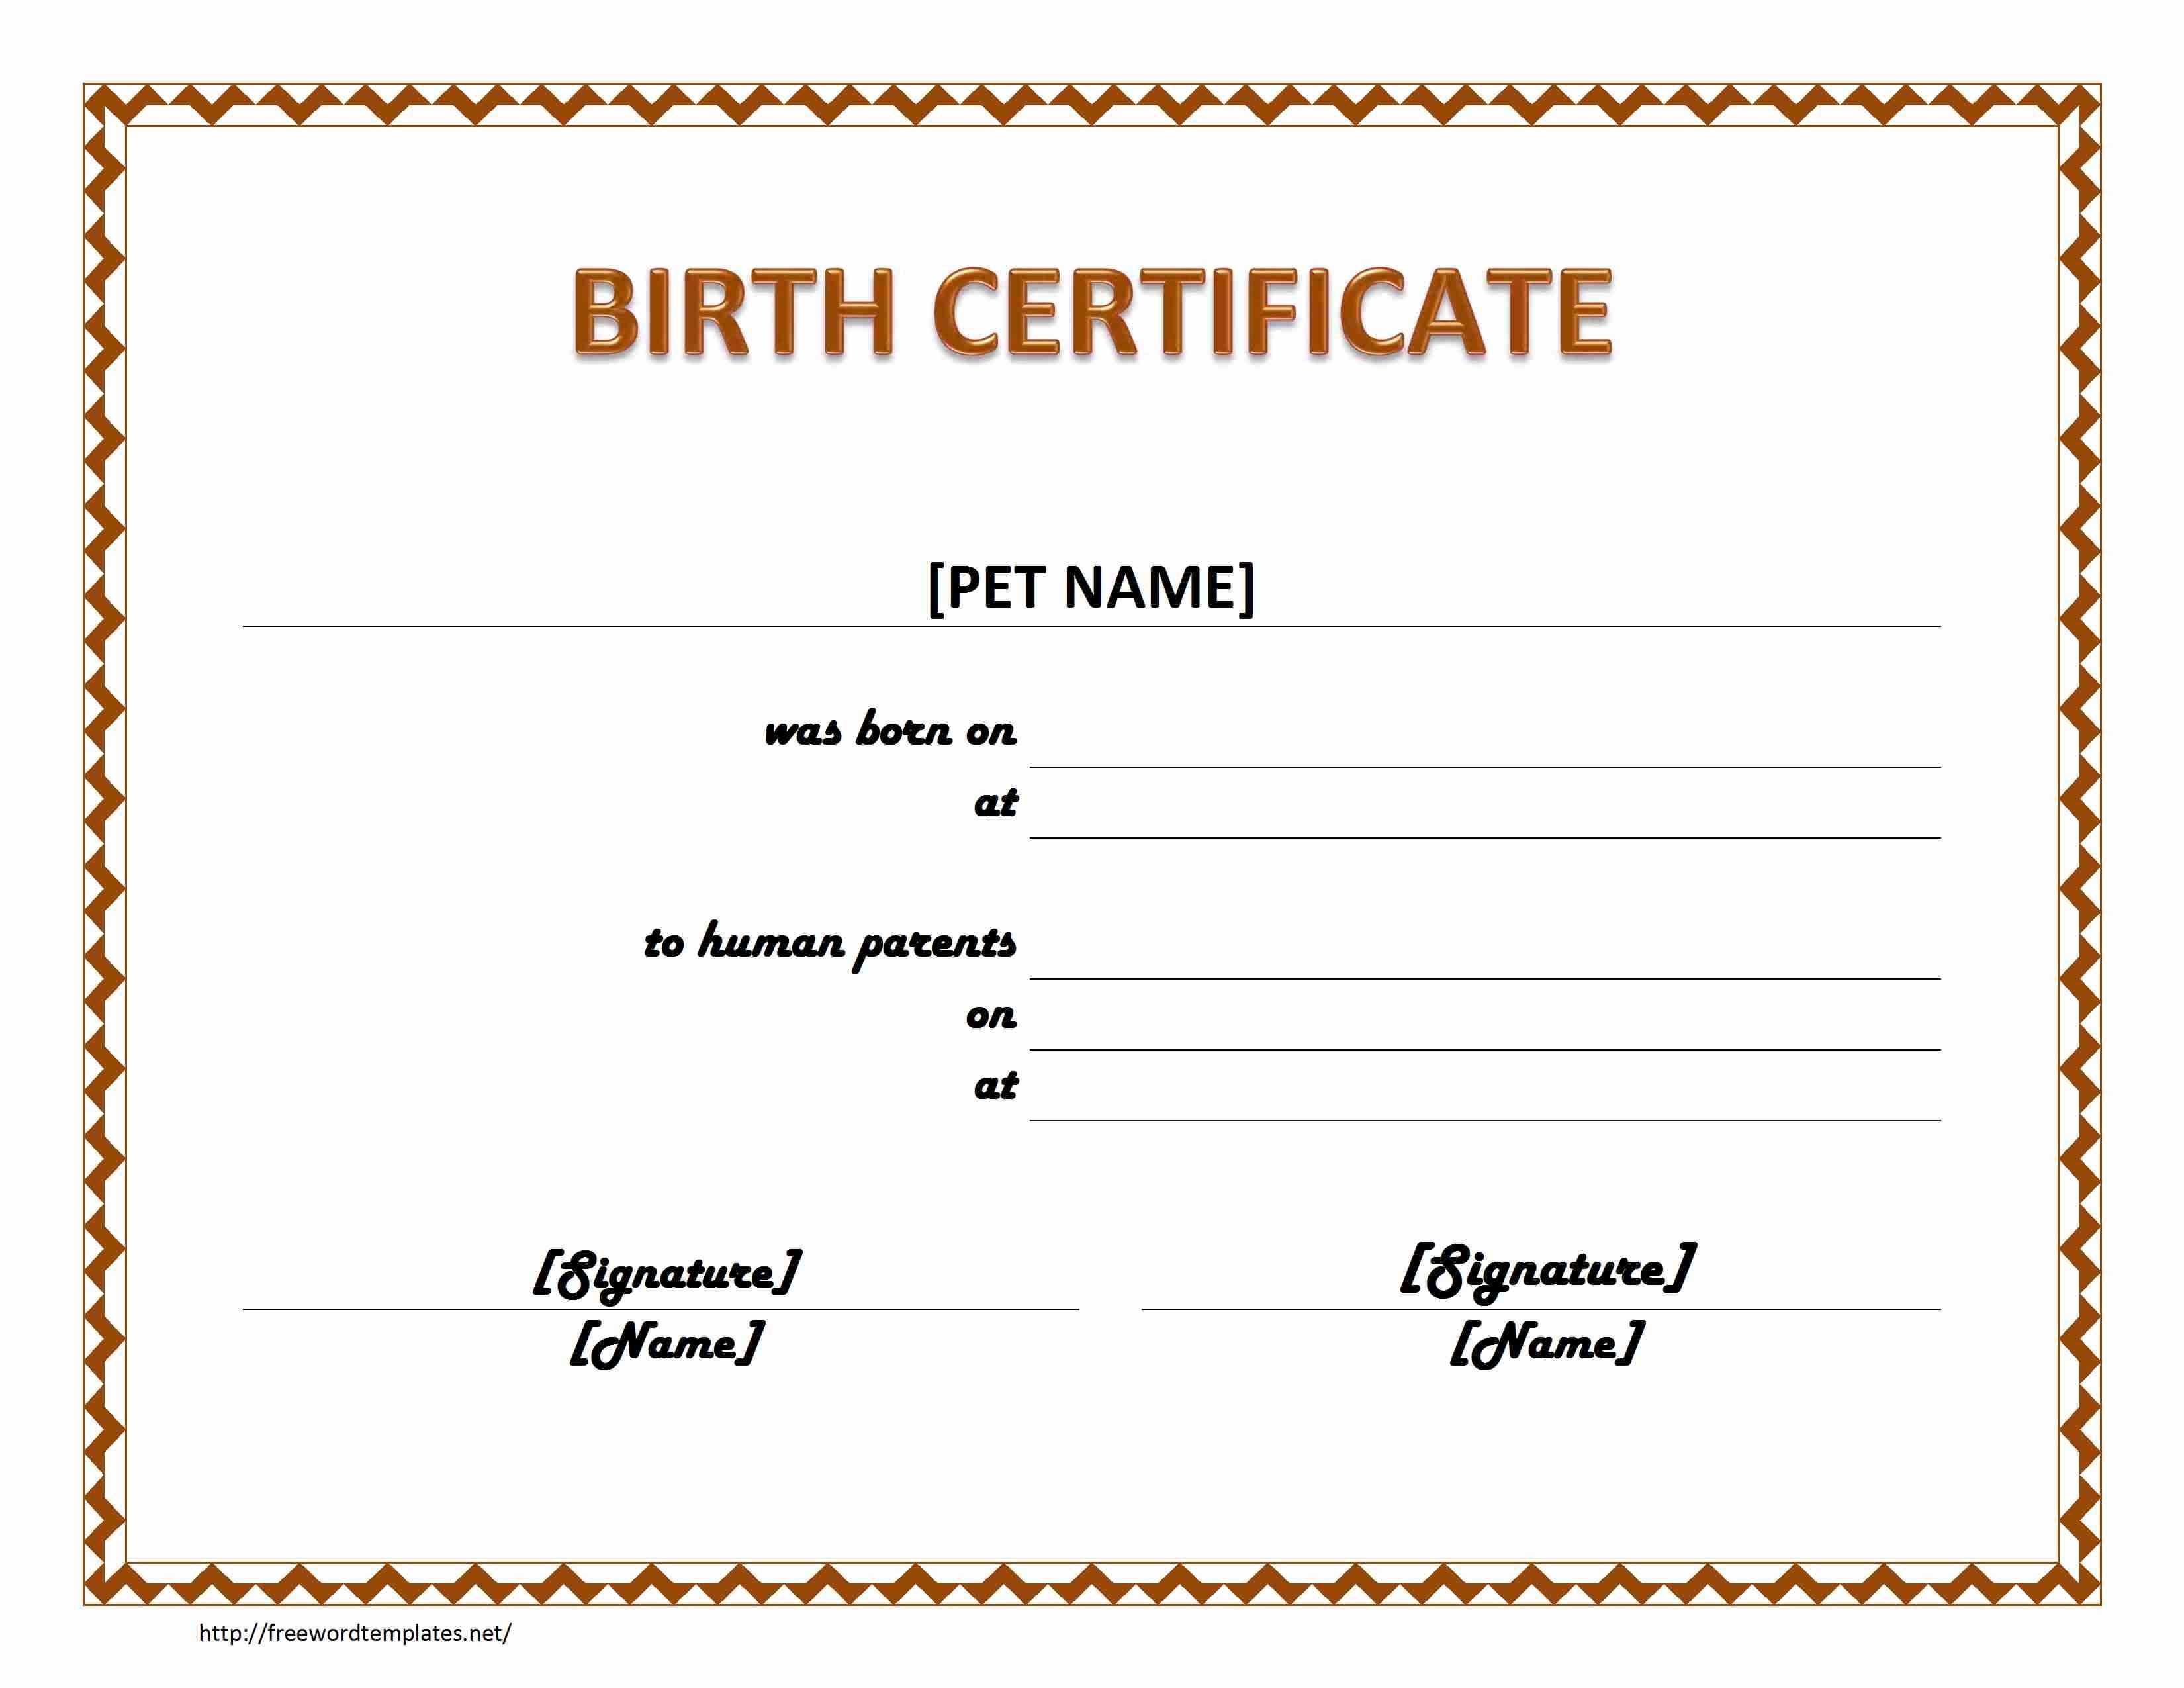 Pet Birth Certificate Maker | Pet Birth Certificate For Word Intended For Editable Birth Certificate Template